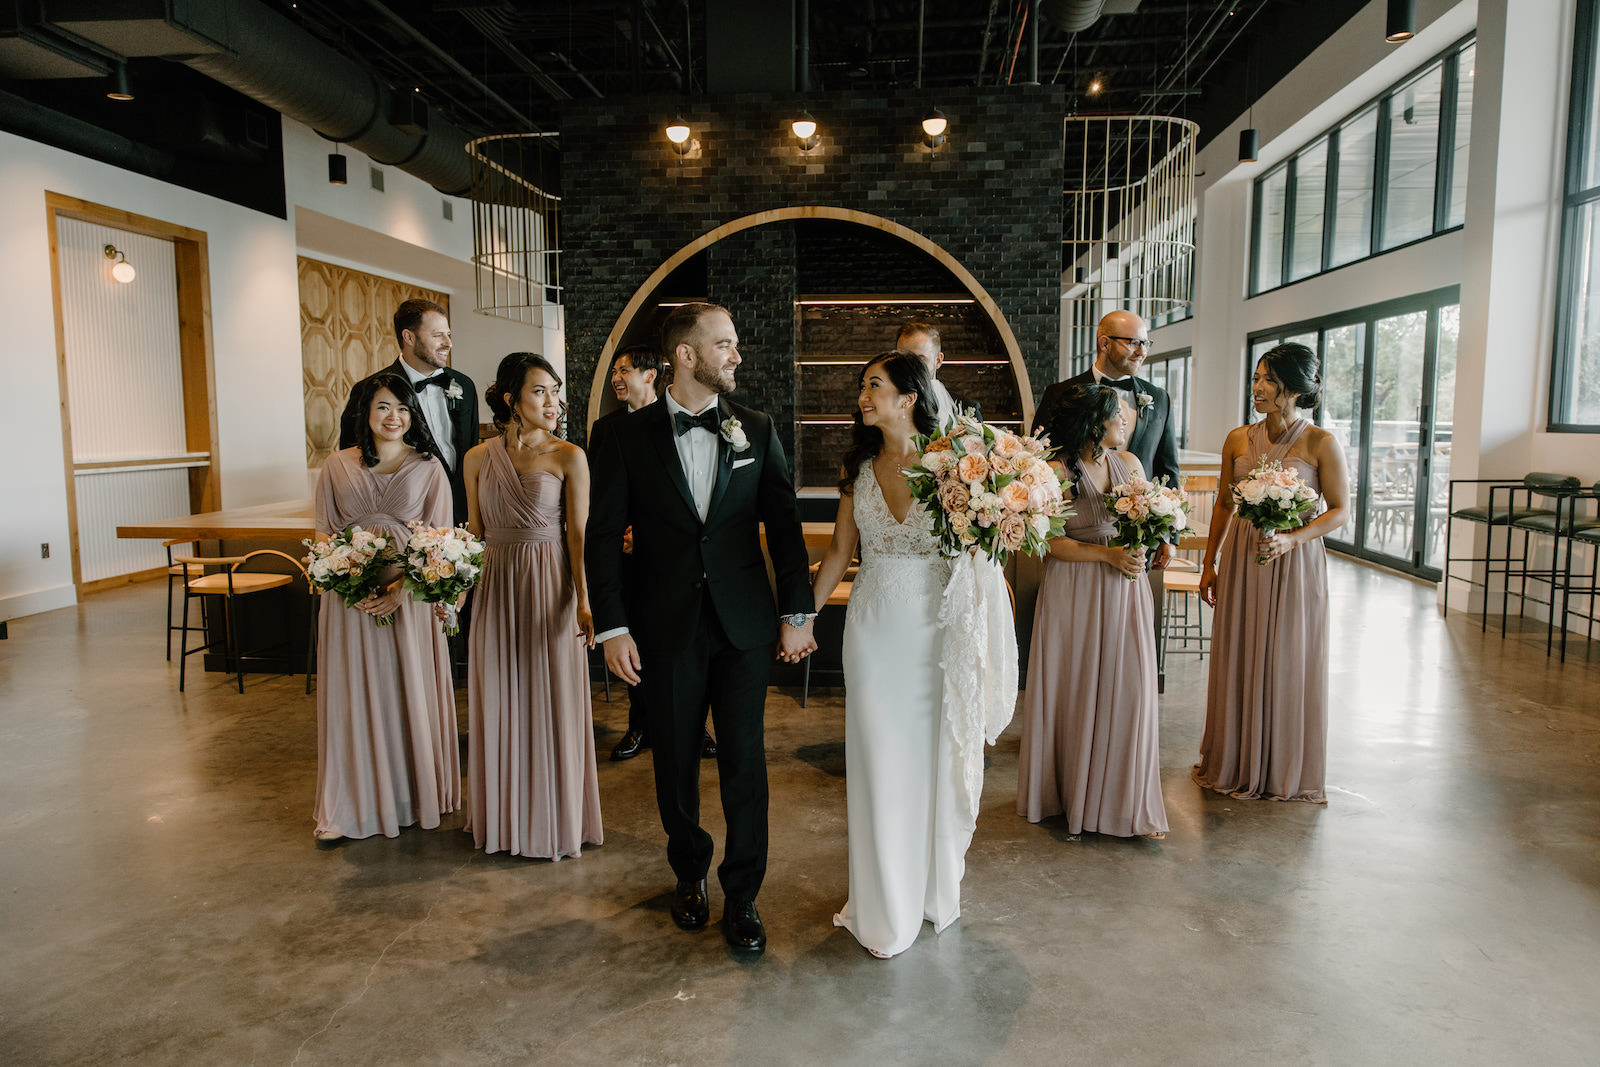 Neutral Modern Boho Wedding, Bride in Lace Bodice with Plunging V Neckline Fitted Wedding Dress Holding Lush Blush Pink and Muave Roses with Greenery Floral Bouquet, Groom Wearing Black Tuxedo, Bridesmaids in Mix and Match Mauve Dresses | Unique South Tampa Wedding Venue Hyde House | Tampa Bay Wedding Florist Iza's Flowers | Wedding Hair and Makeup Adore Bridal